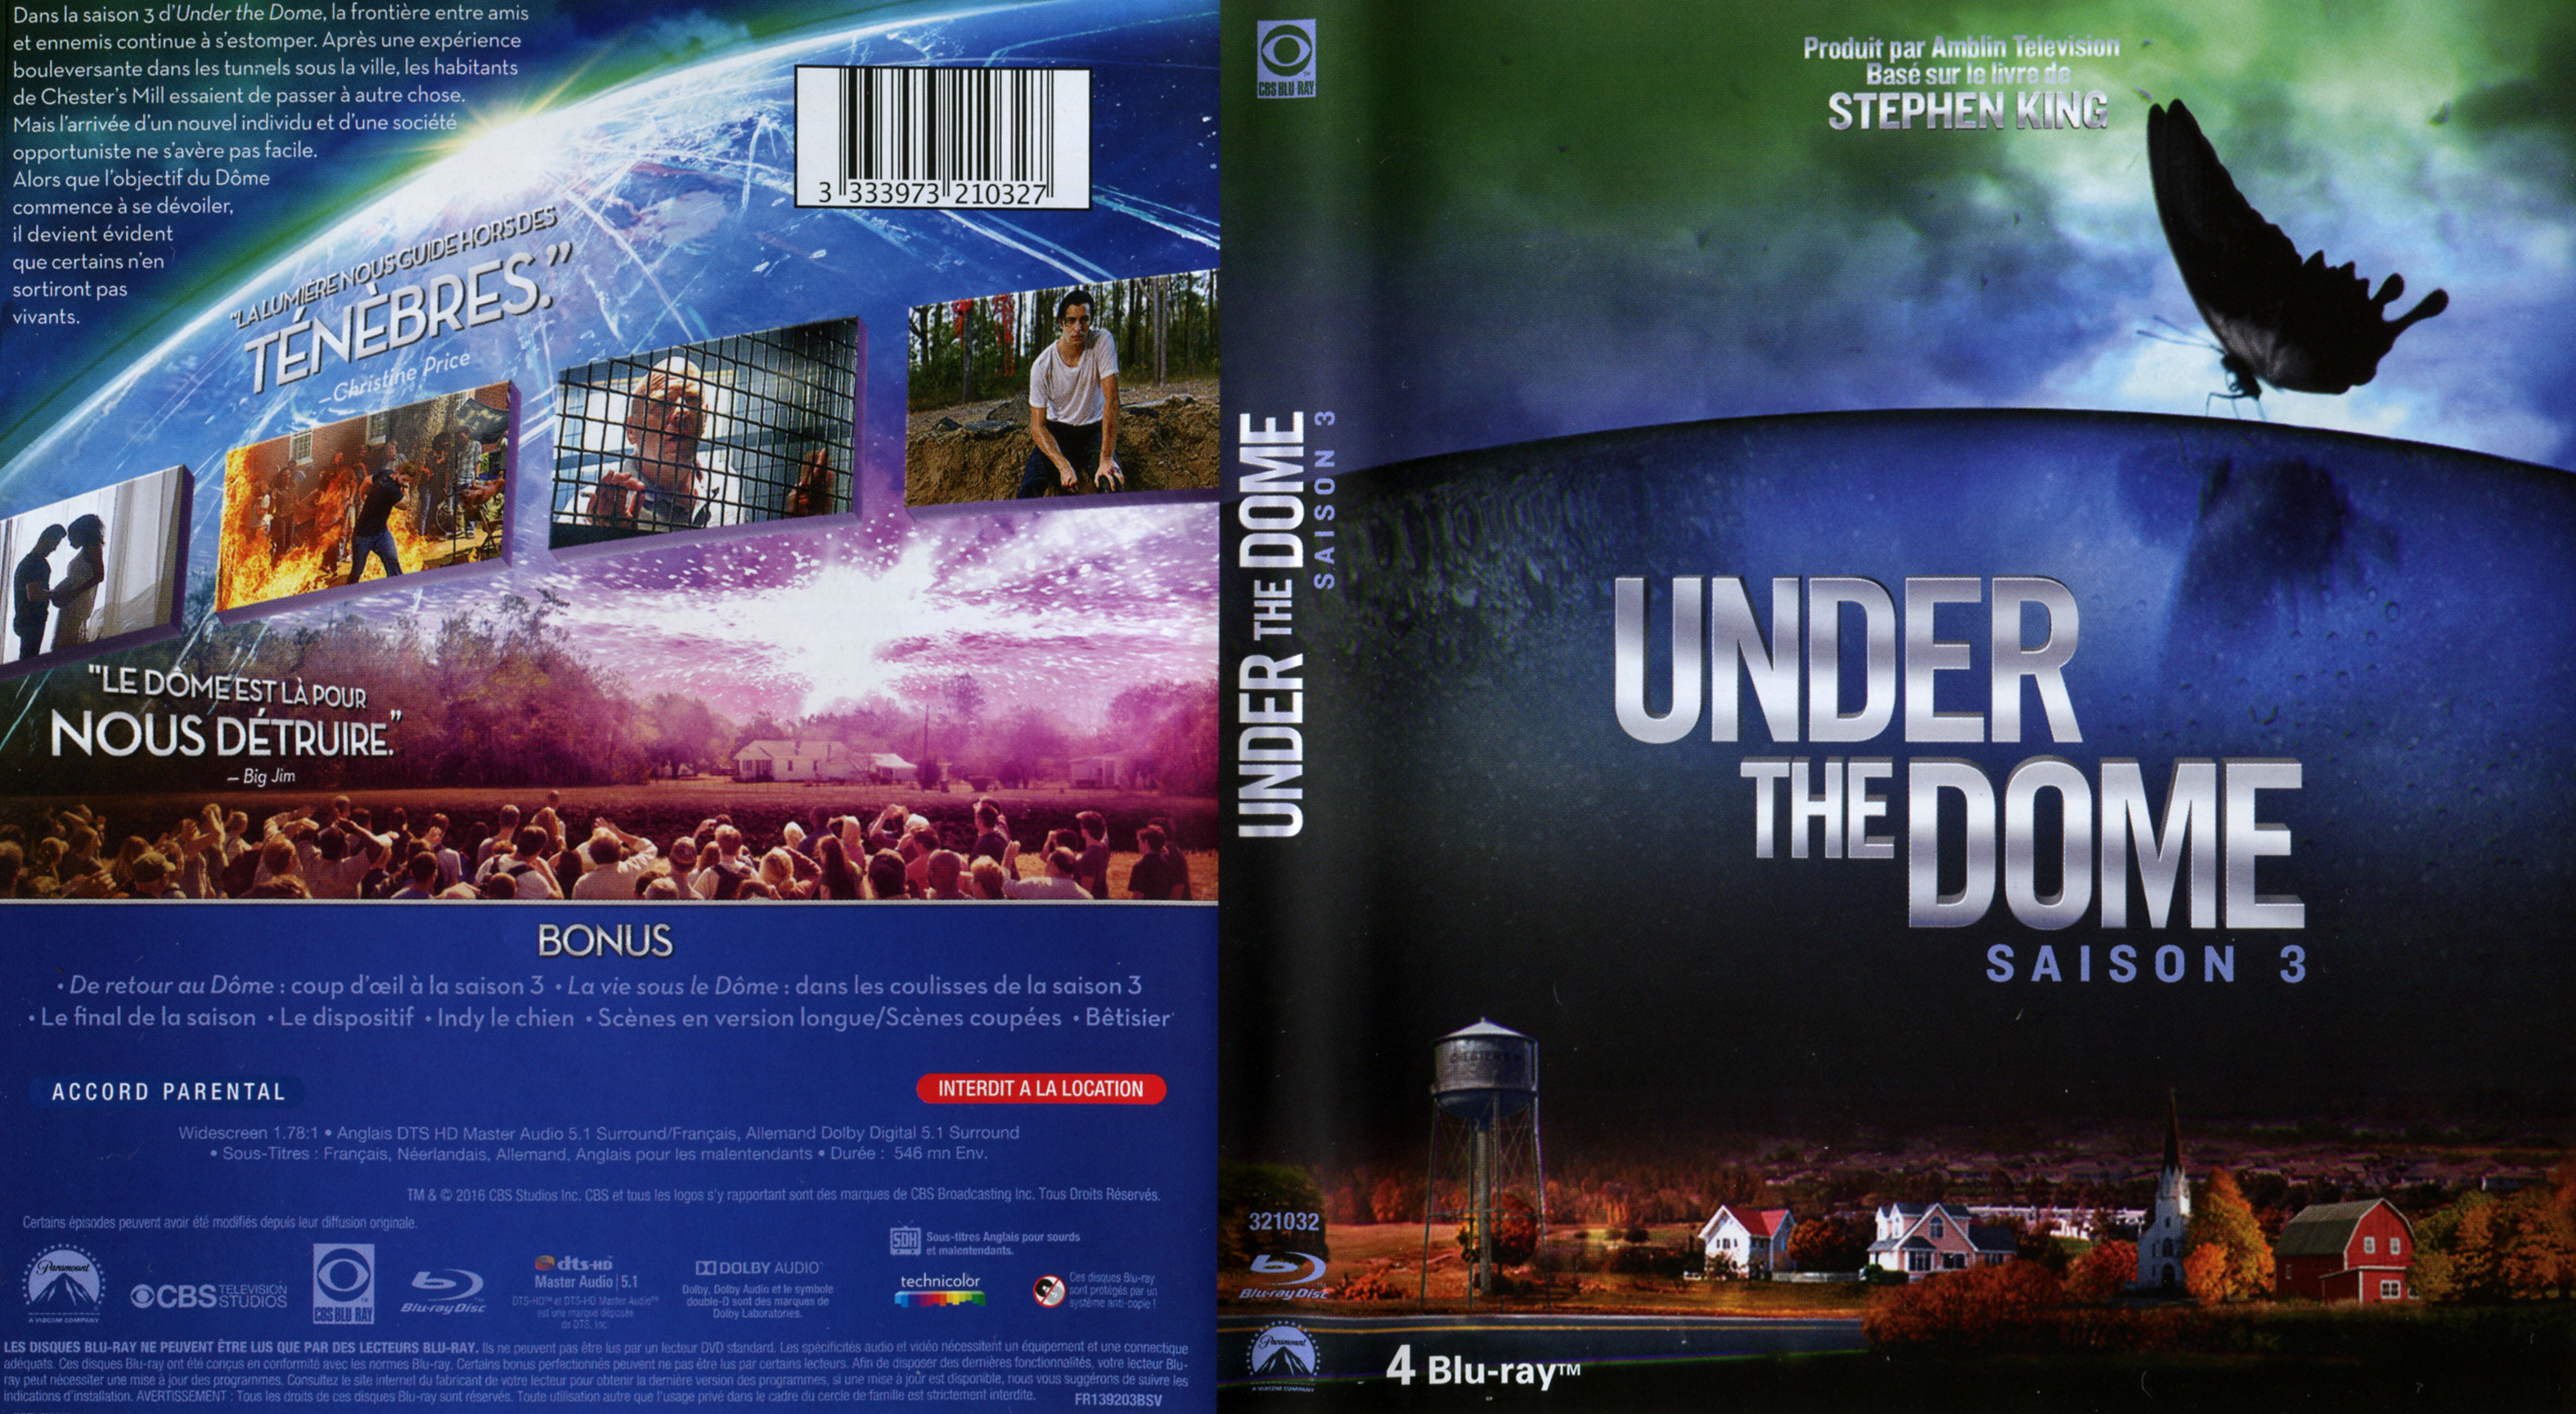 Jaquette DVD Under the Dome saison 3 (BLU-RAY)